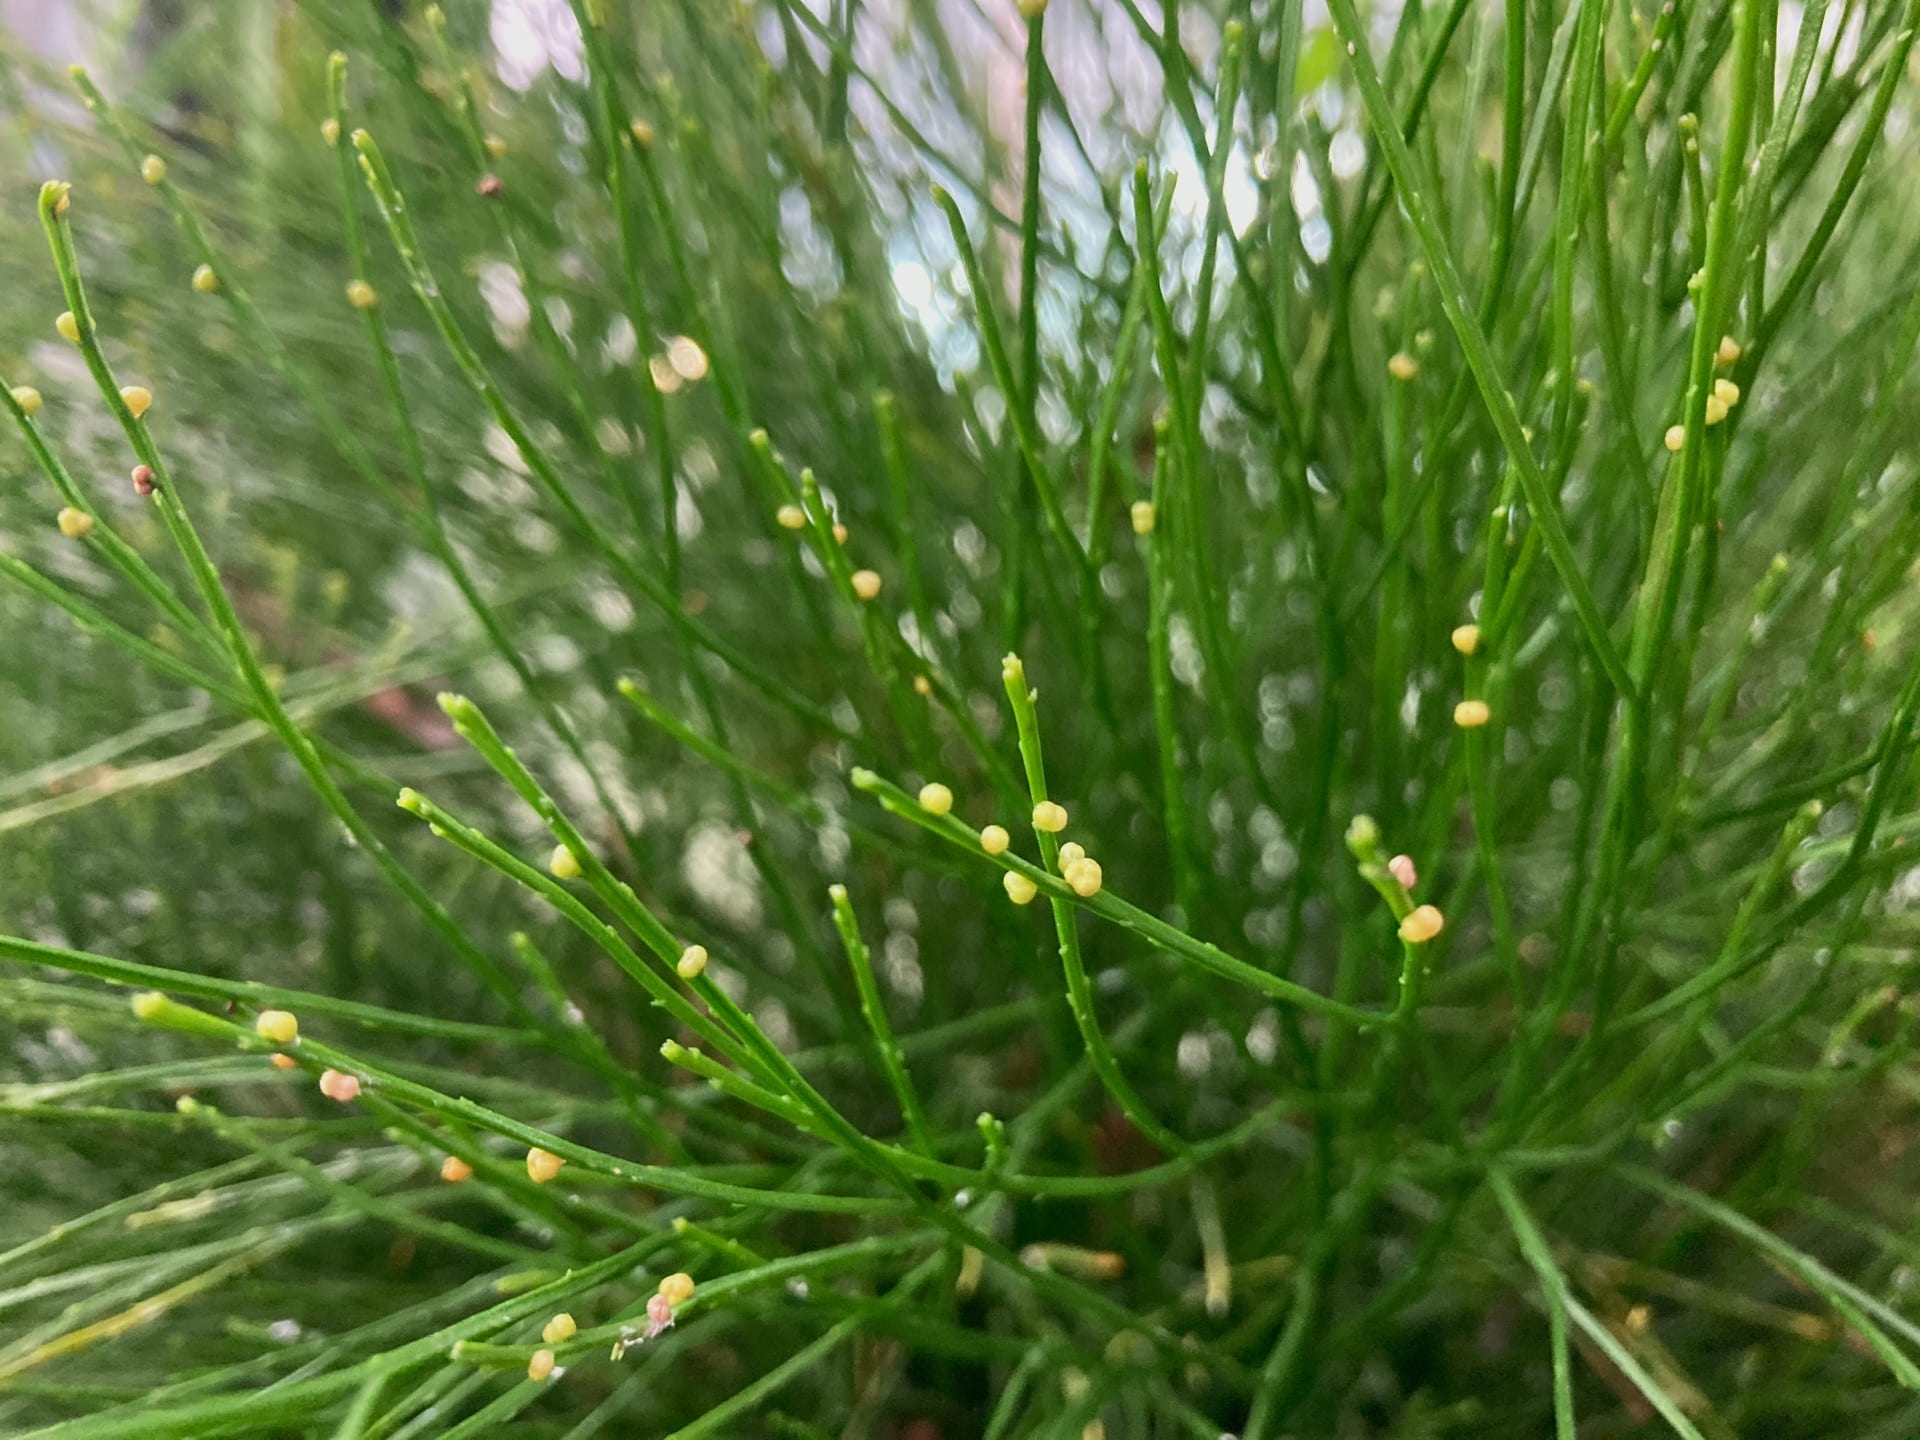 Psilotum x intermedia, the whisk fern, is a fern ally. Like ferns it has a vascular system and reproduces via spore, it differs, in part, by not having any true leaves- relying on its flattened stems for photosynthesis.